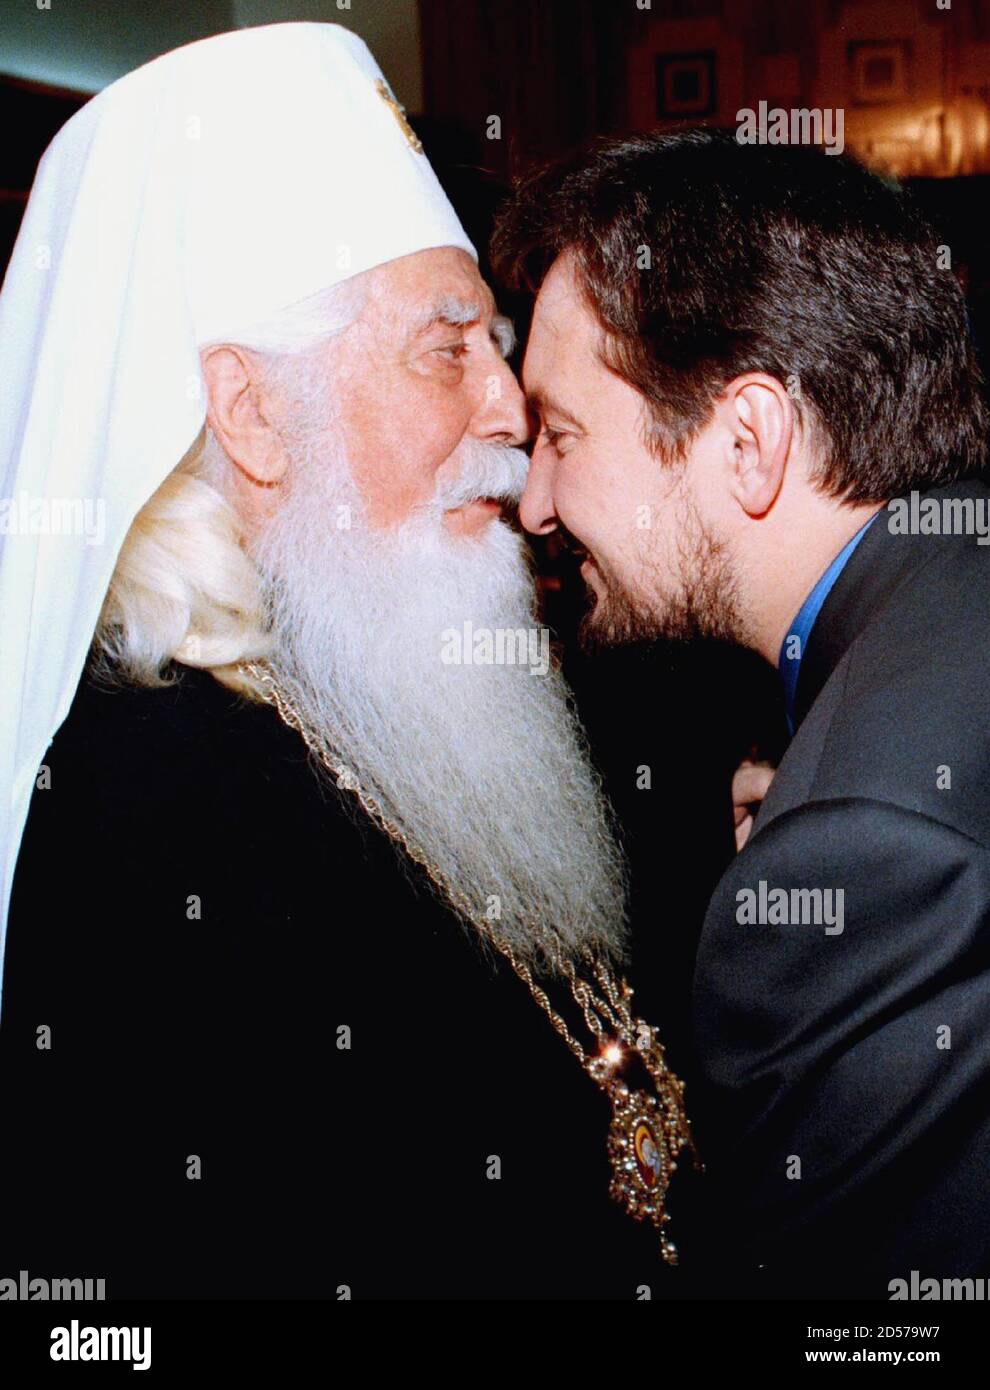 New Macedonian Prime Minister Ljupce Georgievski (R) receives blessing kiss from Macedonian Orthodox Archbishop Mihail (L) after inauguration ceremony in Skopje capita November 30. A new Macedonian government was voted into office by parliament on Monday, clearing the way for NATO to seek formal permission for an 'extraction force' to be deployed in the former Yugoslav republic. Last week top NATO officials said the force, meant to rescue unarmed international 'verifiers' from neighboring Kosovo in case of renewed fighting in the Yugoslav province, could be deployed as early as this week if it Stock Photo